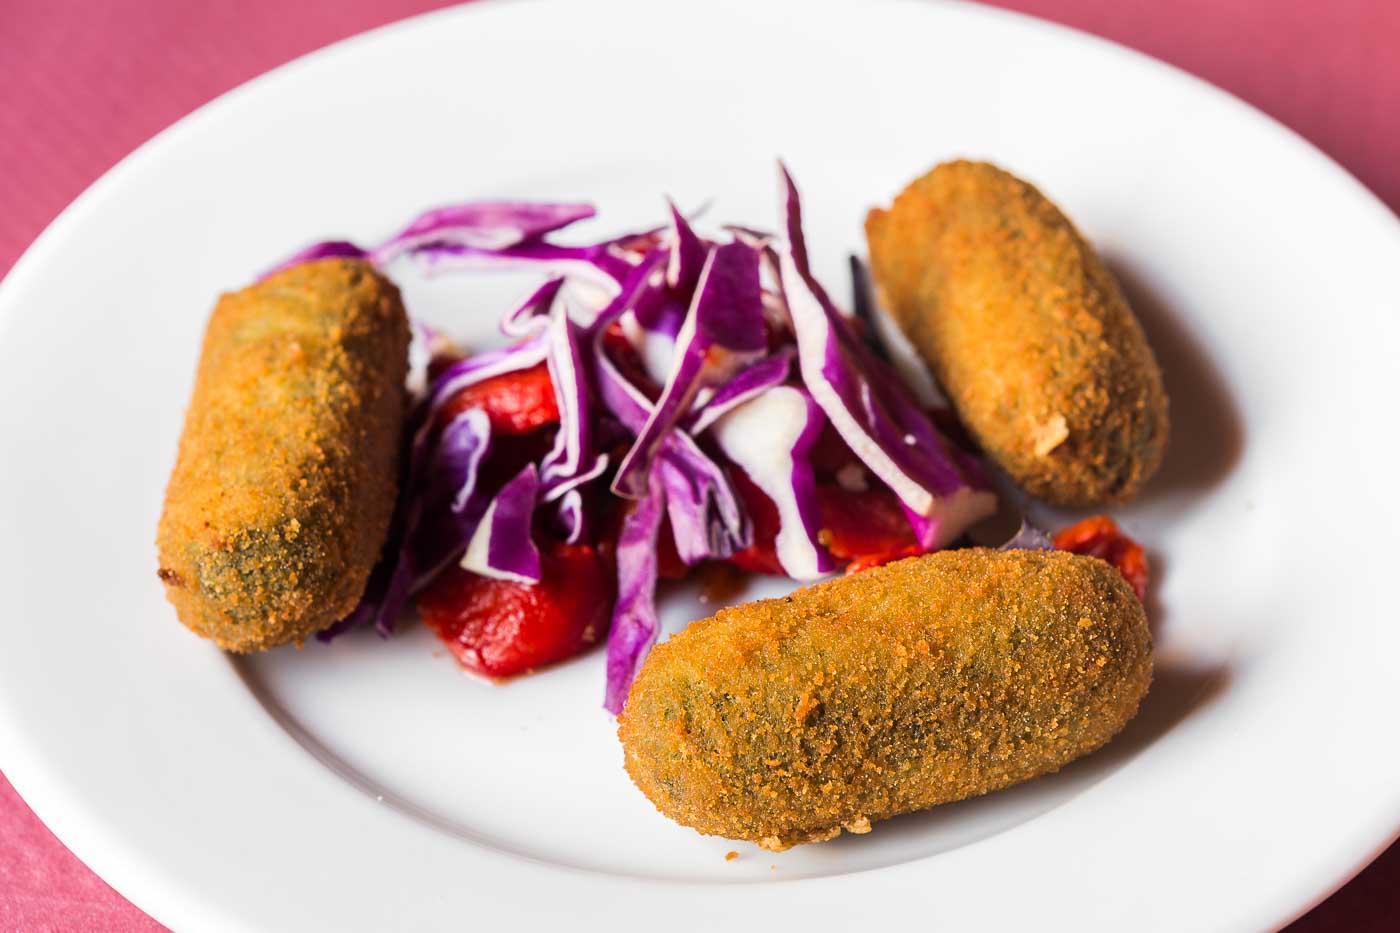 Spinach Croquettes